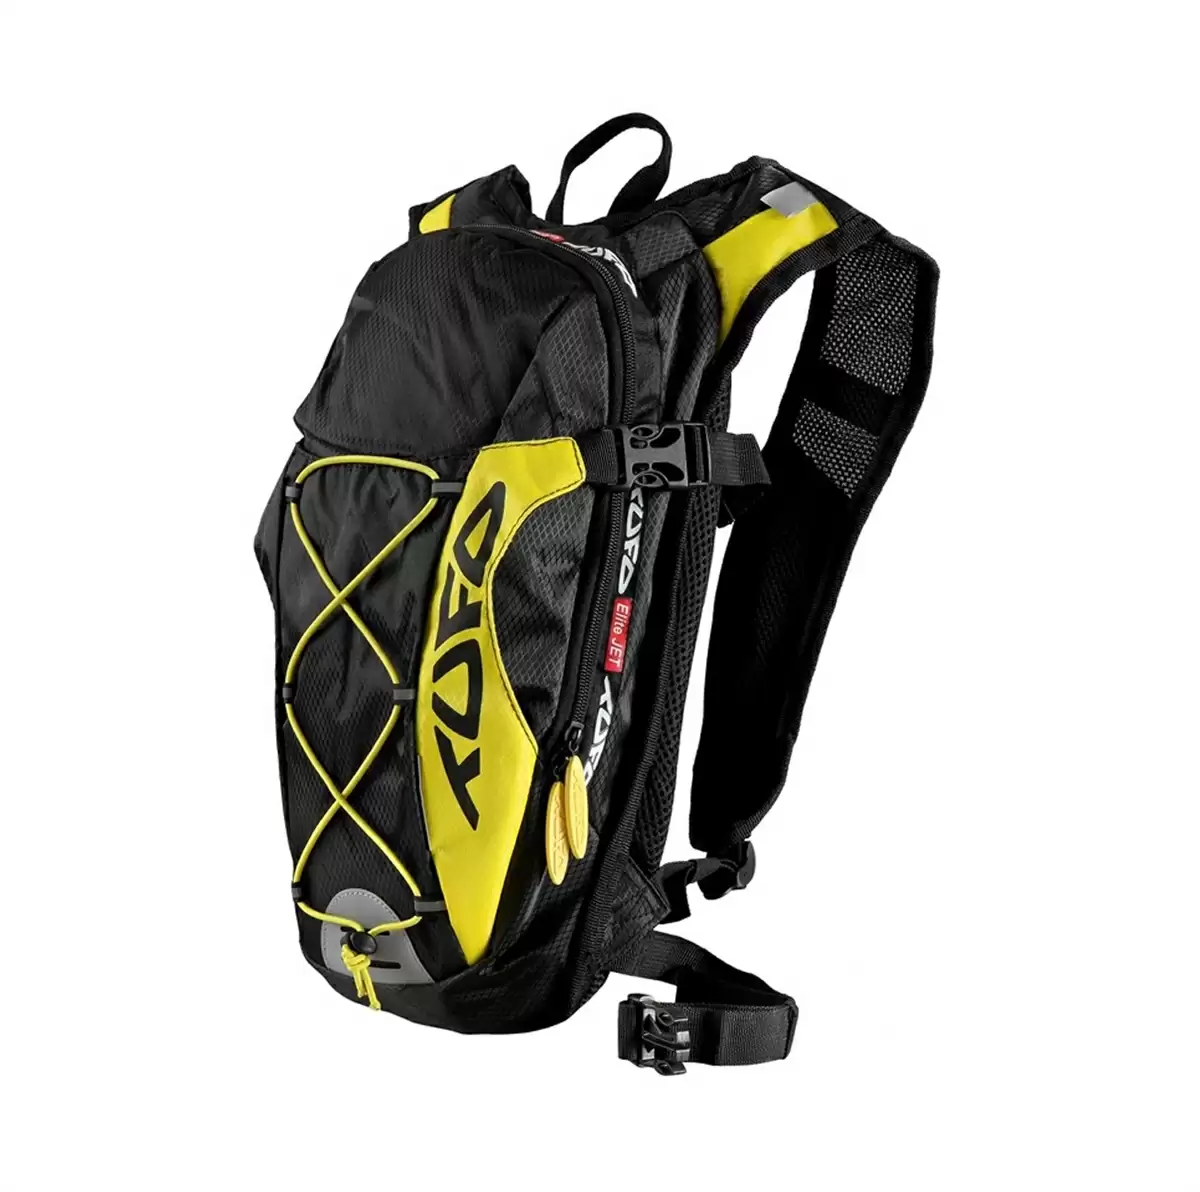 cycling multifunctional backpack 10L black yellow - image